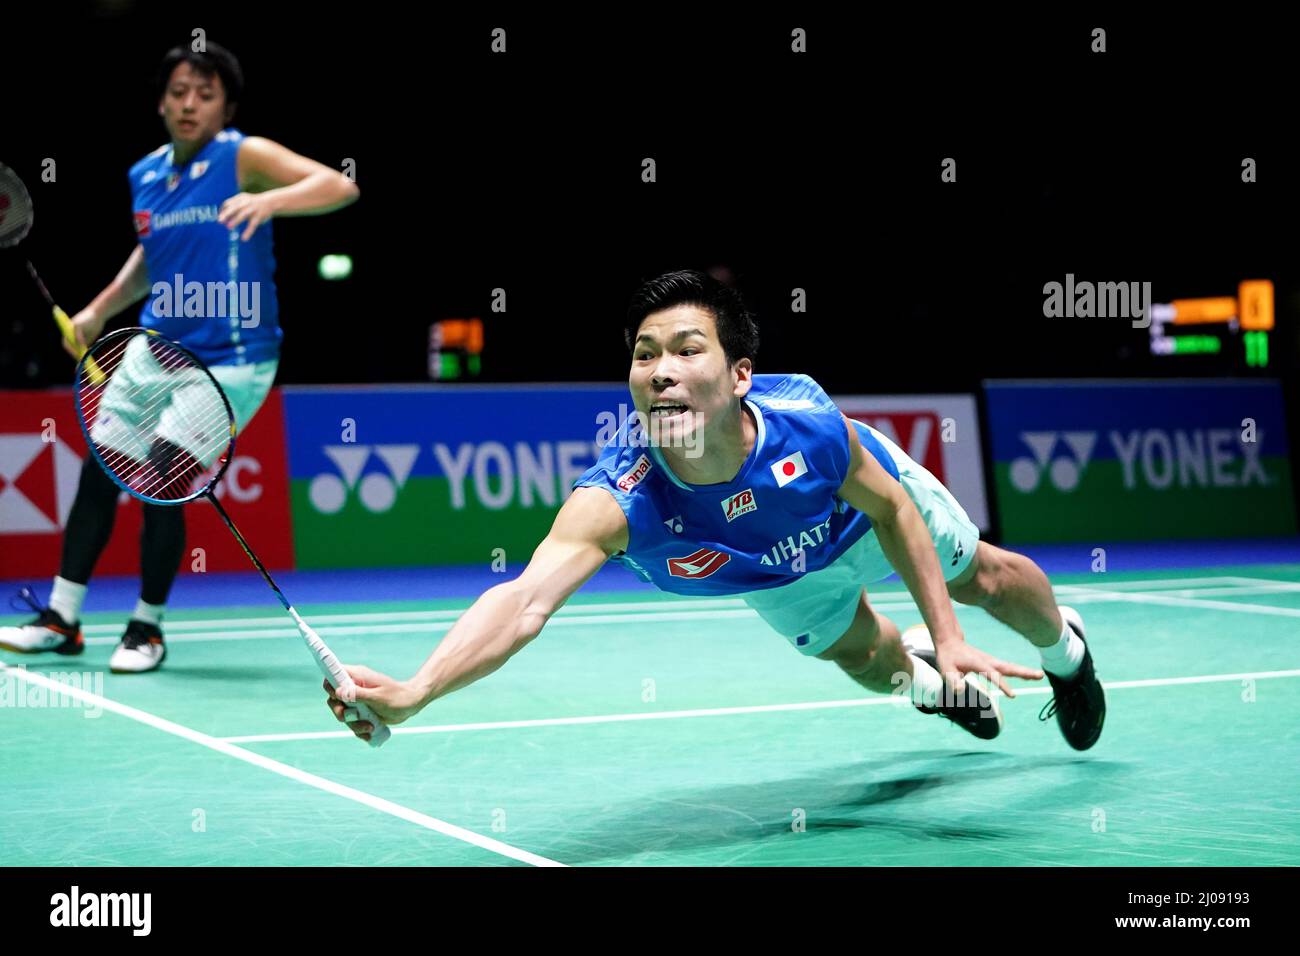 Japan's Akira Koga (left) and Taichi Saito in action against Indonesia's Marcus Fernaldi Gideon and Kevin Saniava Sukamuljo during day two of the YONEX All England Open Badminton Championships at the Utilita Arena Birmingham. Picture date: Thursday March 17, 2022. Stock Photo